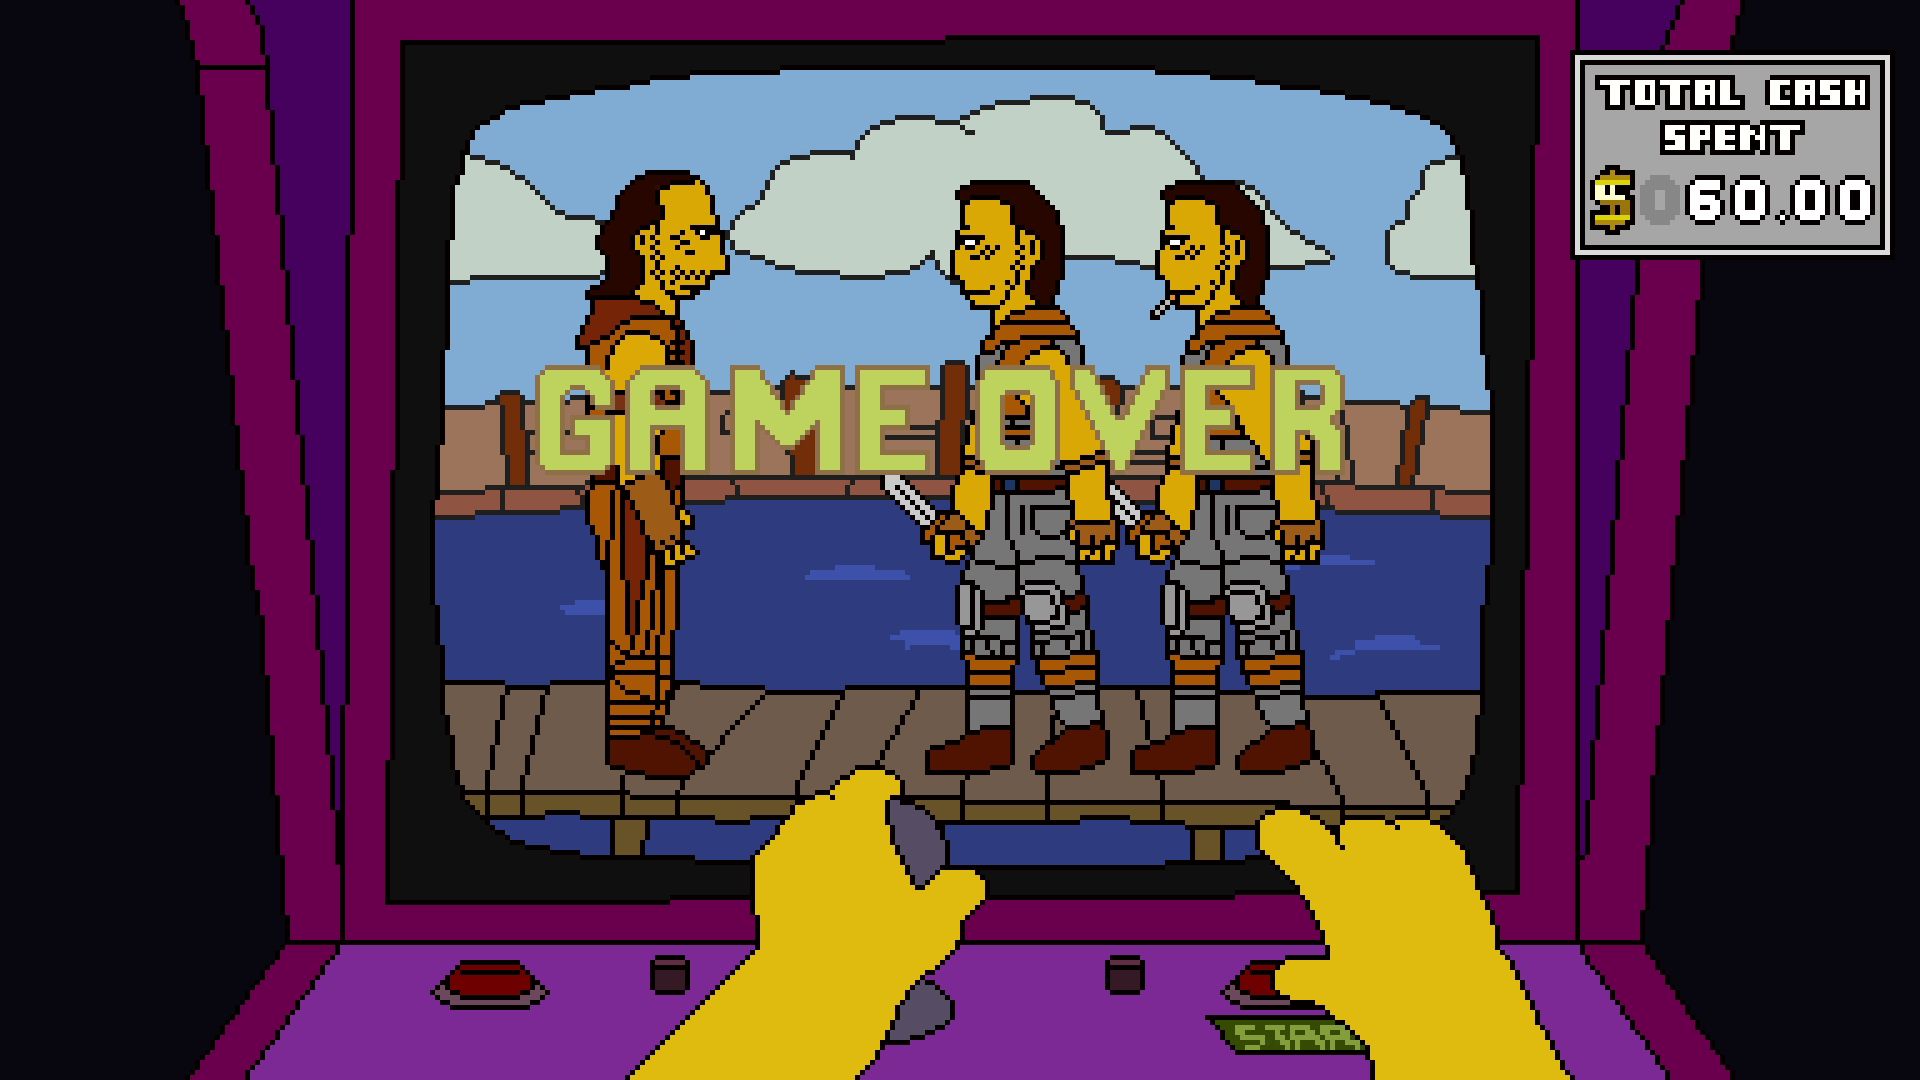 A game over screen on Kevin Costner's Waterworld - the main character has been stabbed by an enemy on the right side of the arcade cabinet screen